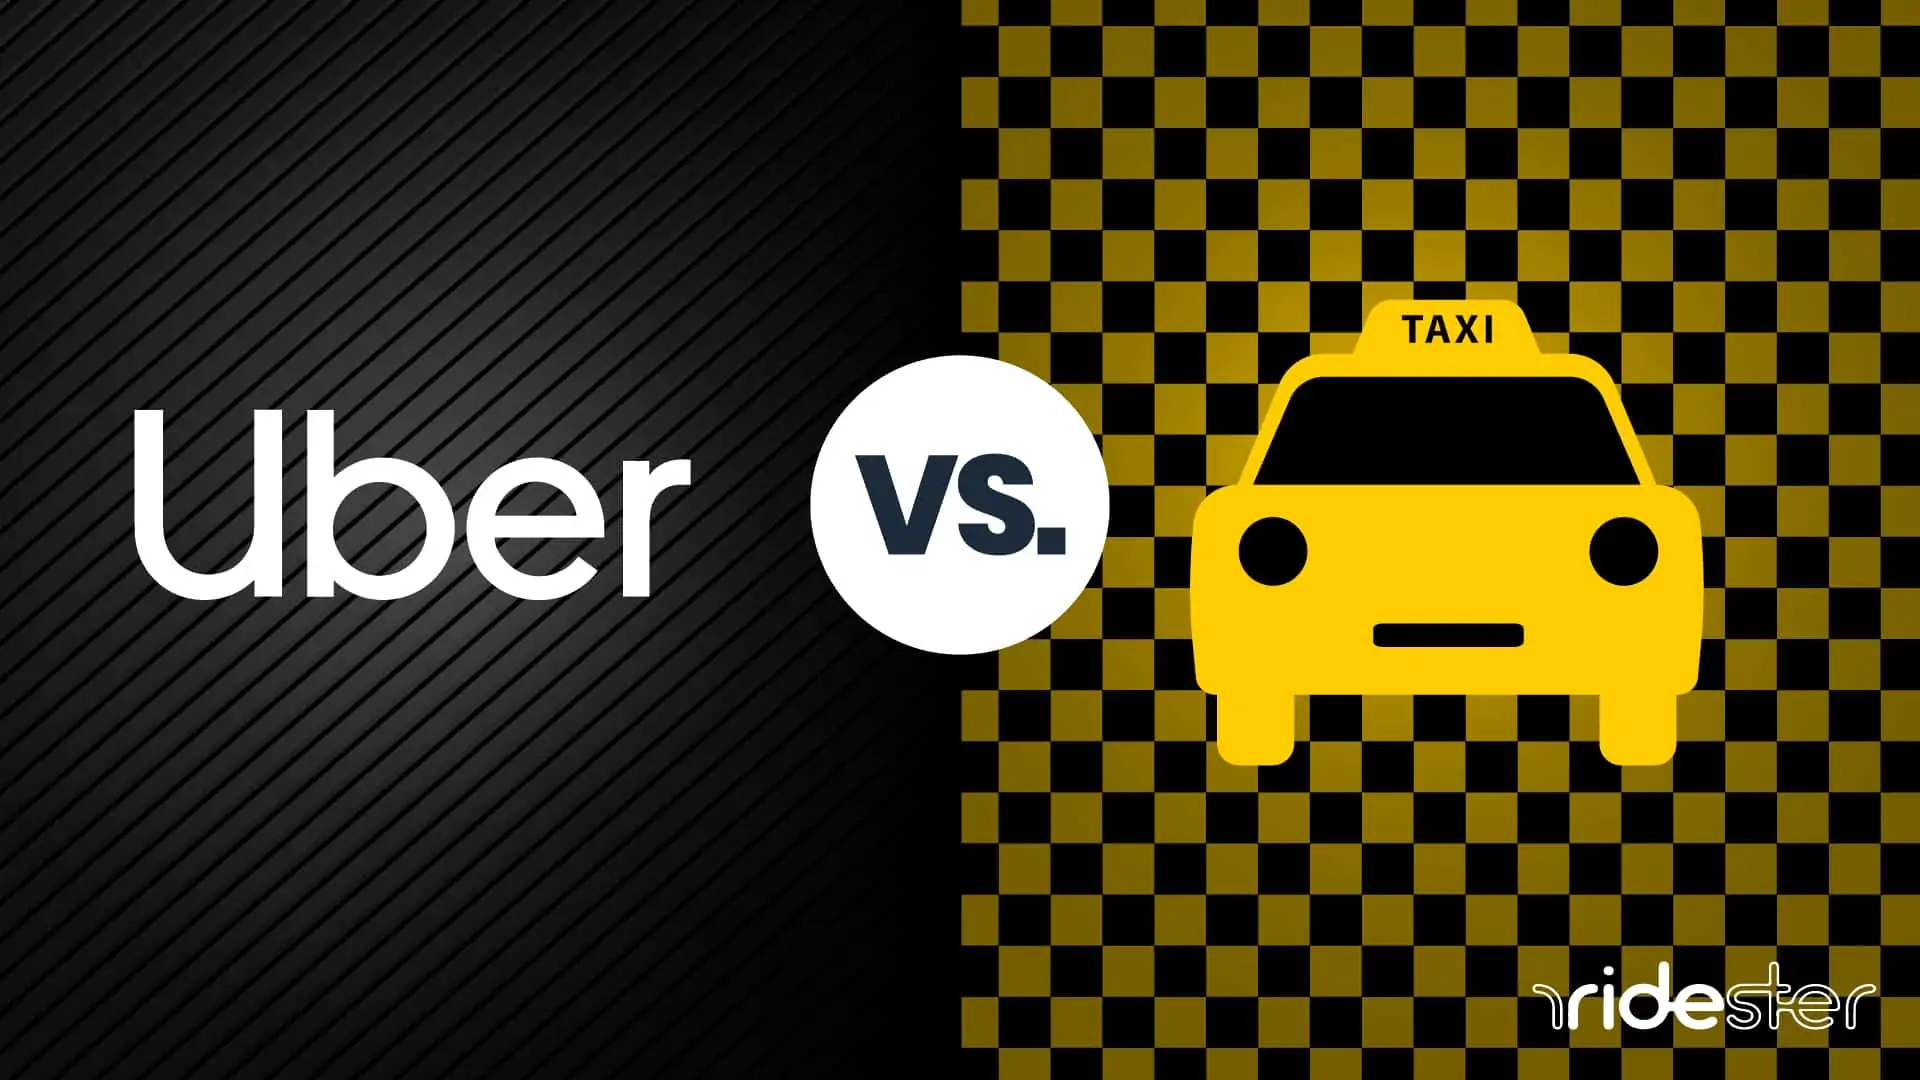 vector graphic showing uber vs taxi side by side